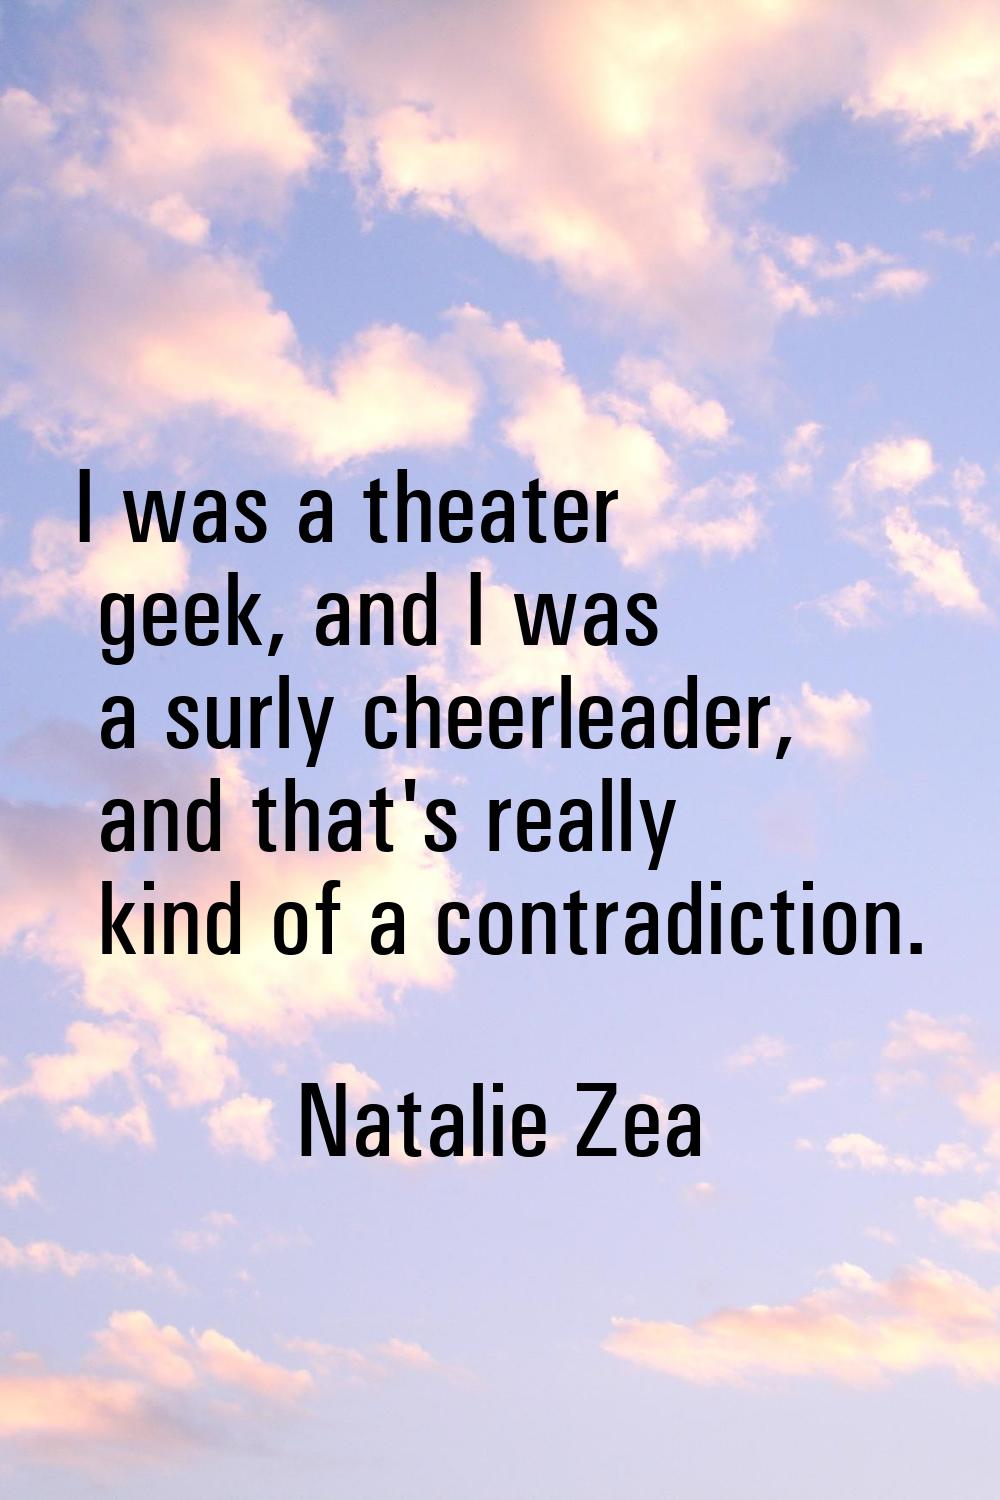 I was a theater geek, and I was a surly cheerleader, and that's really kind of a contradiction.